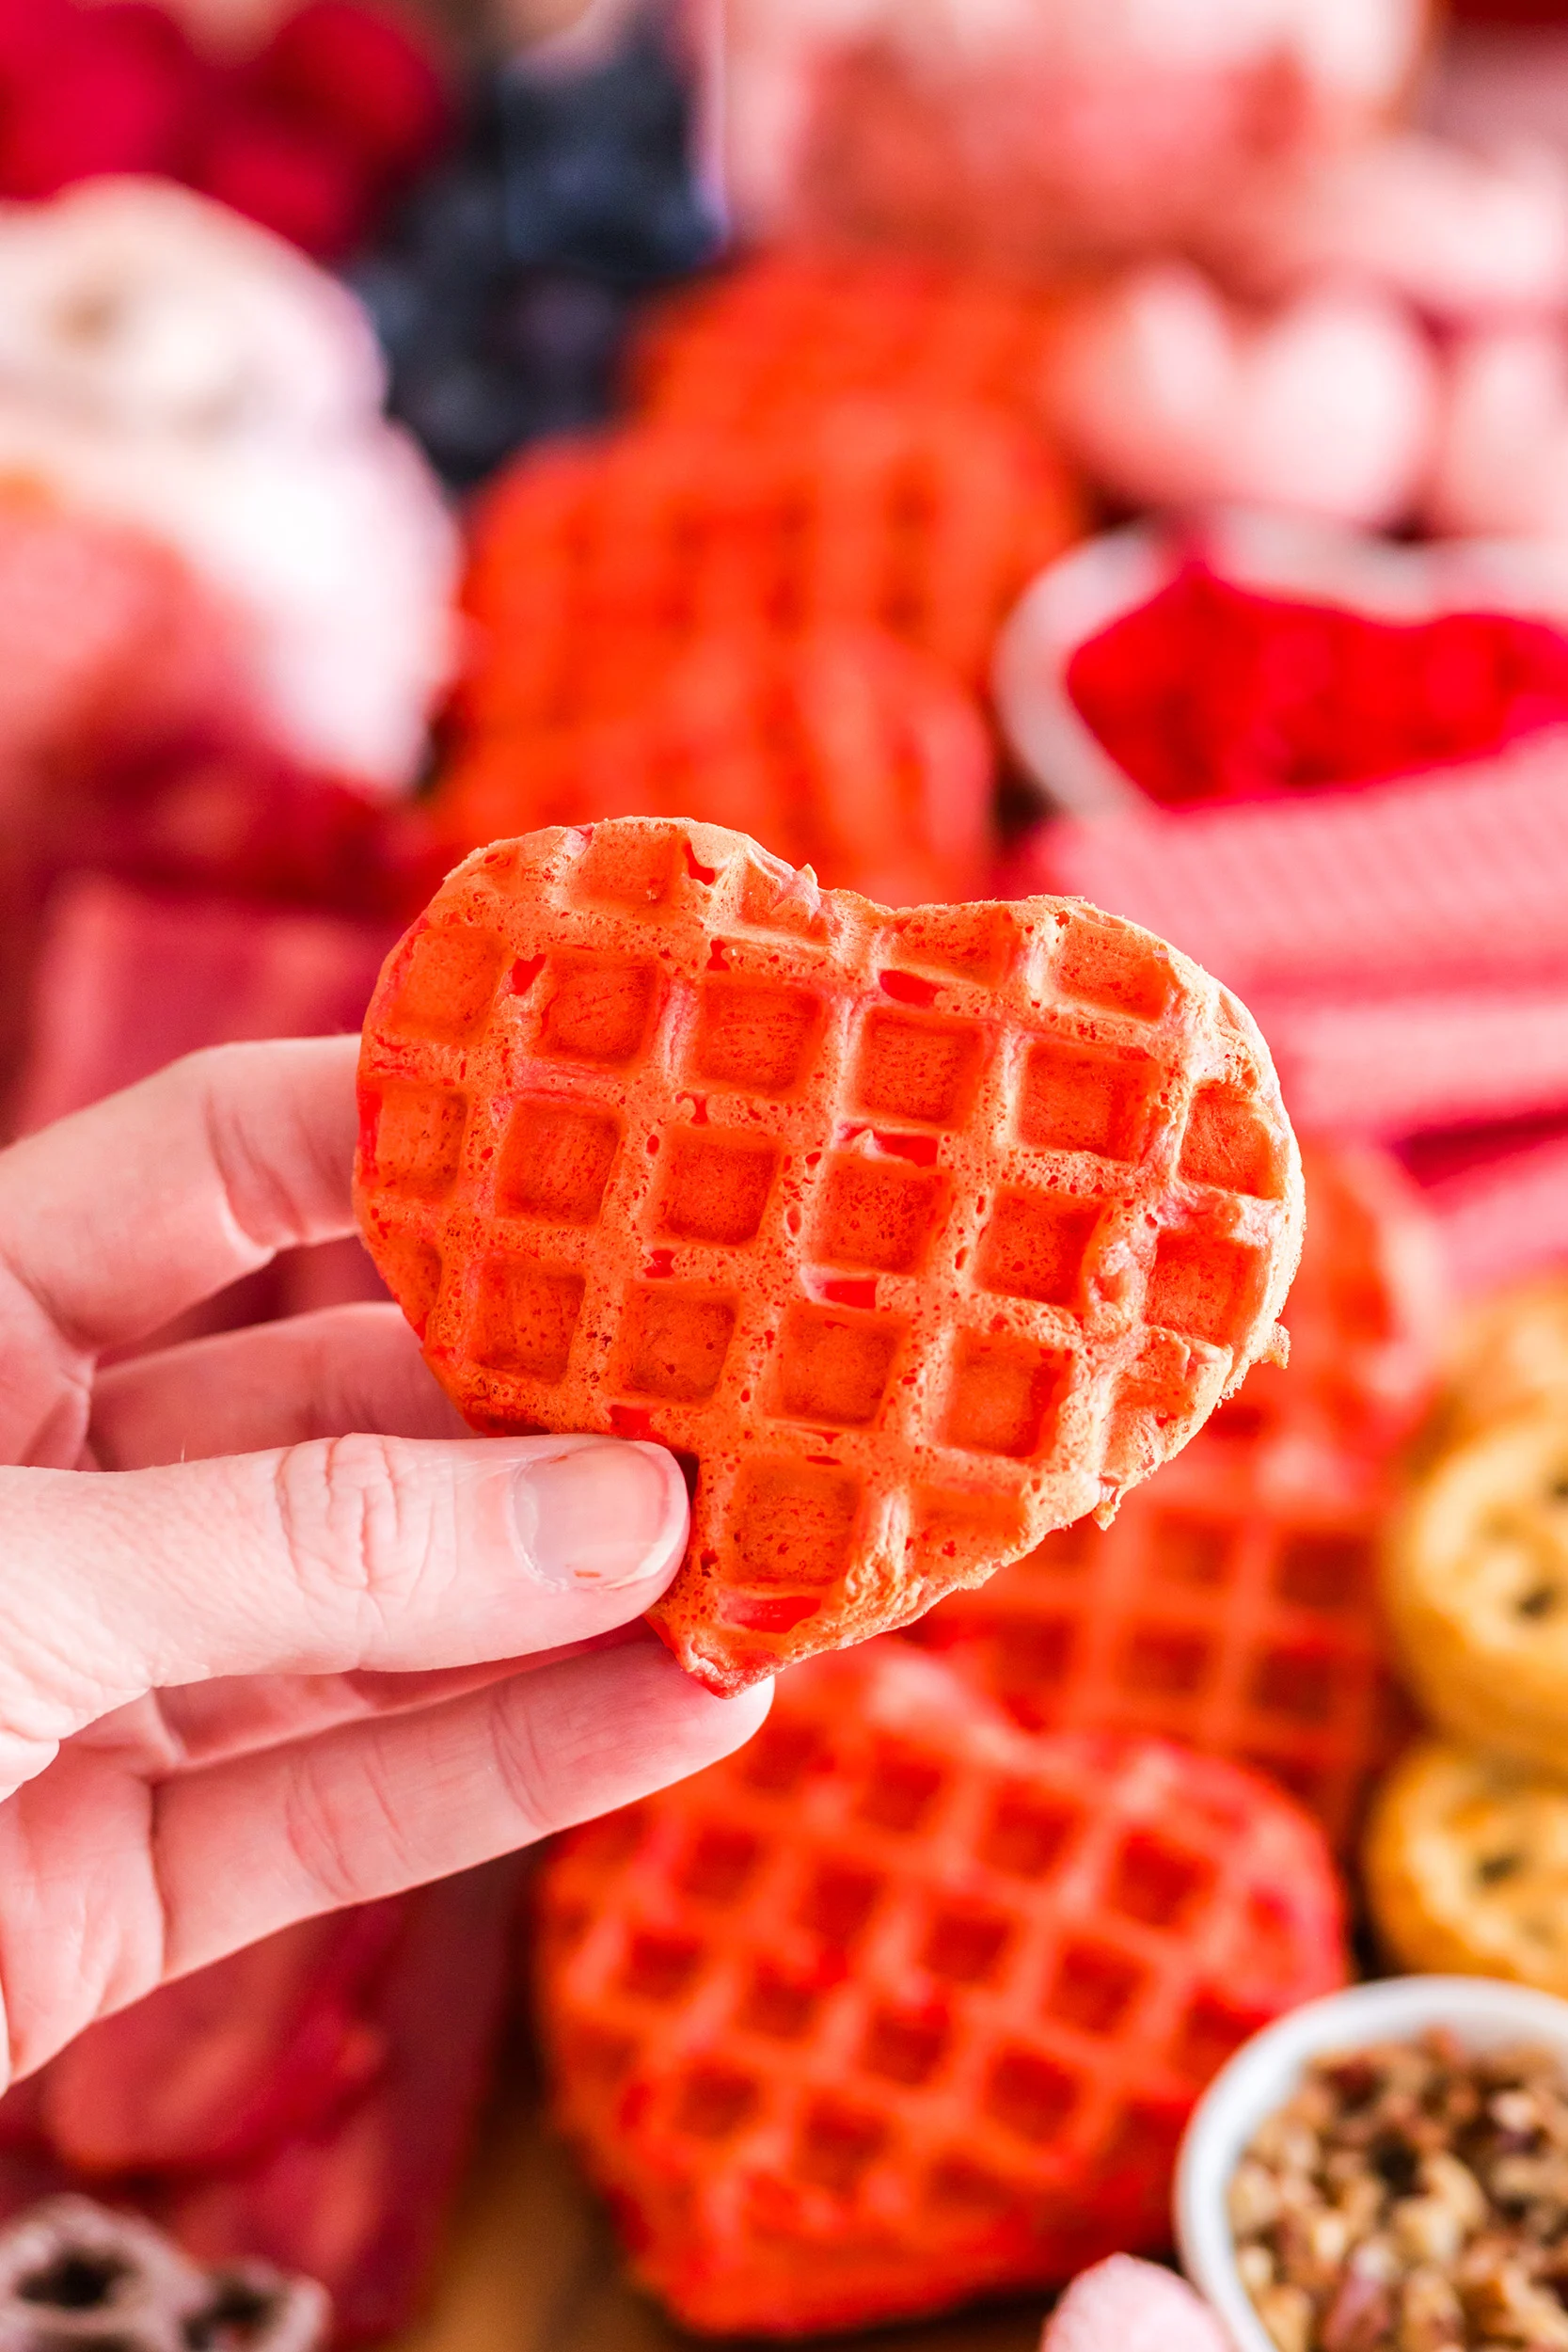 This Mini Heart-Shaped Waffle Maker Has Valentine's Day Breakfast Written  All Over It